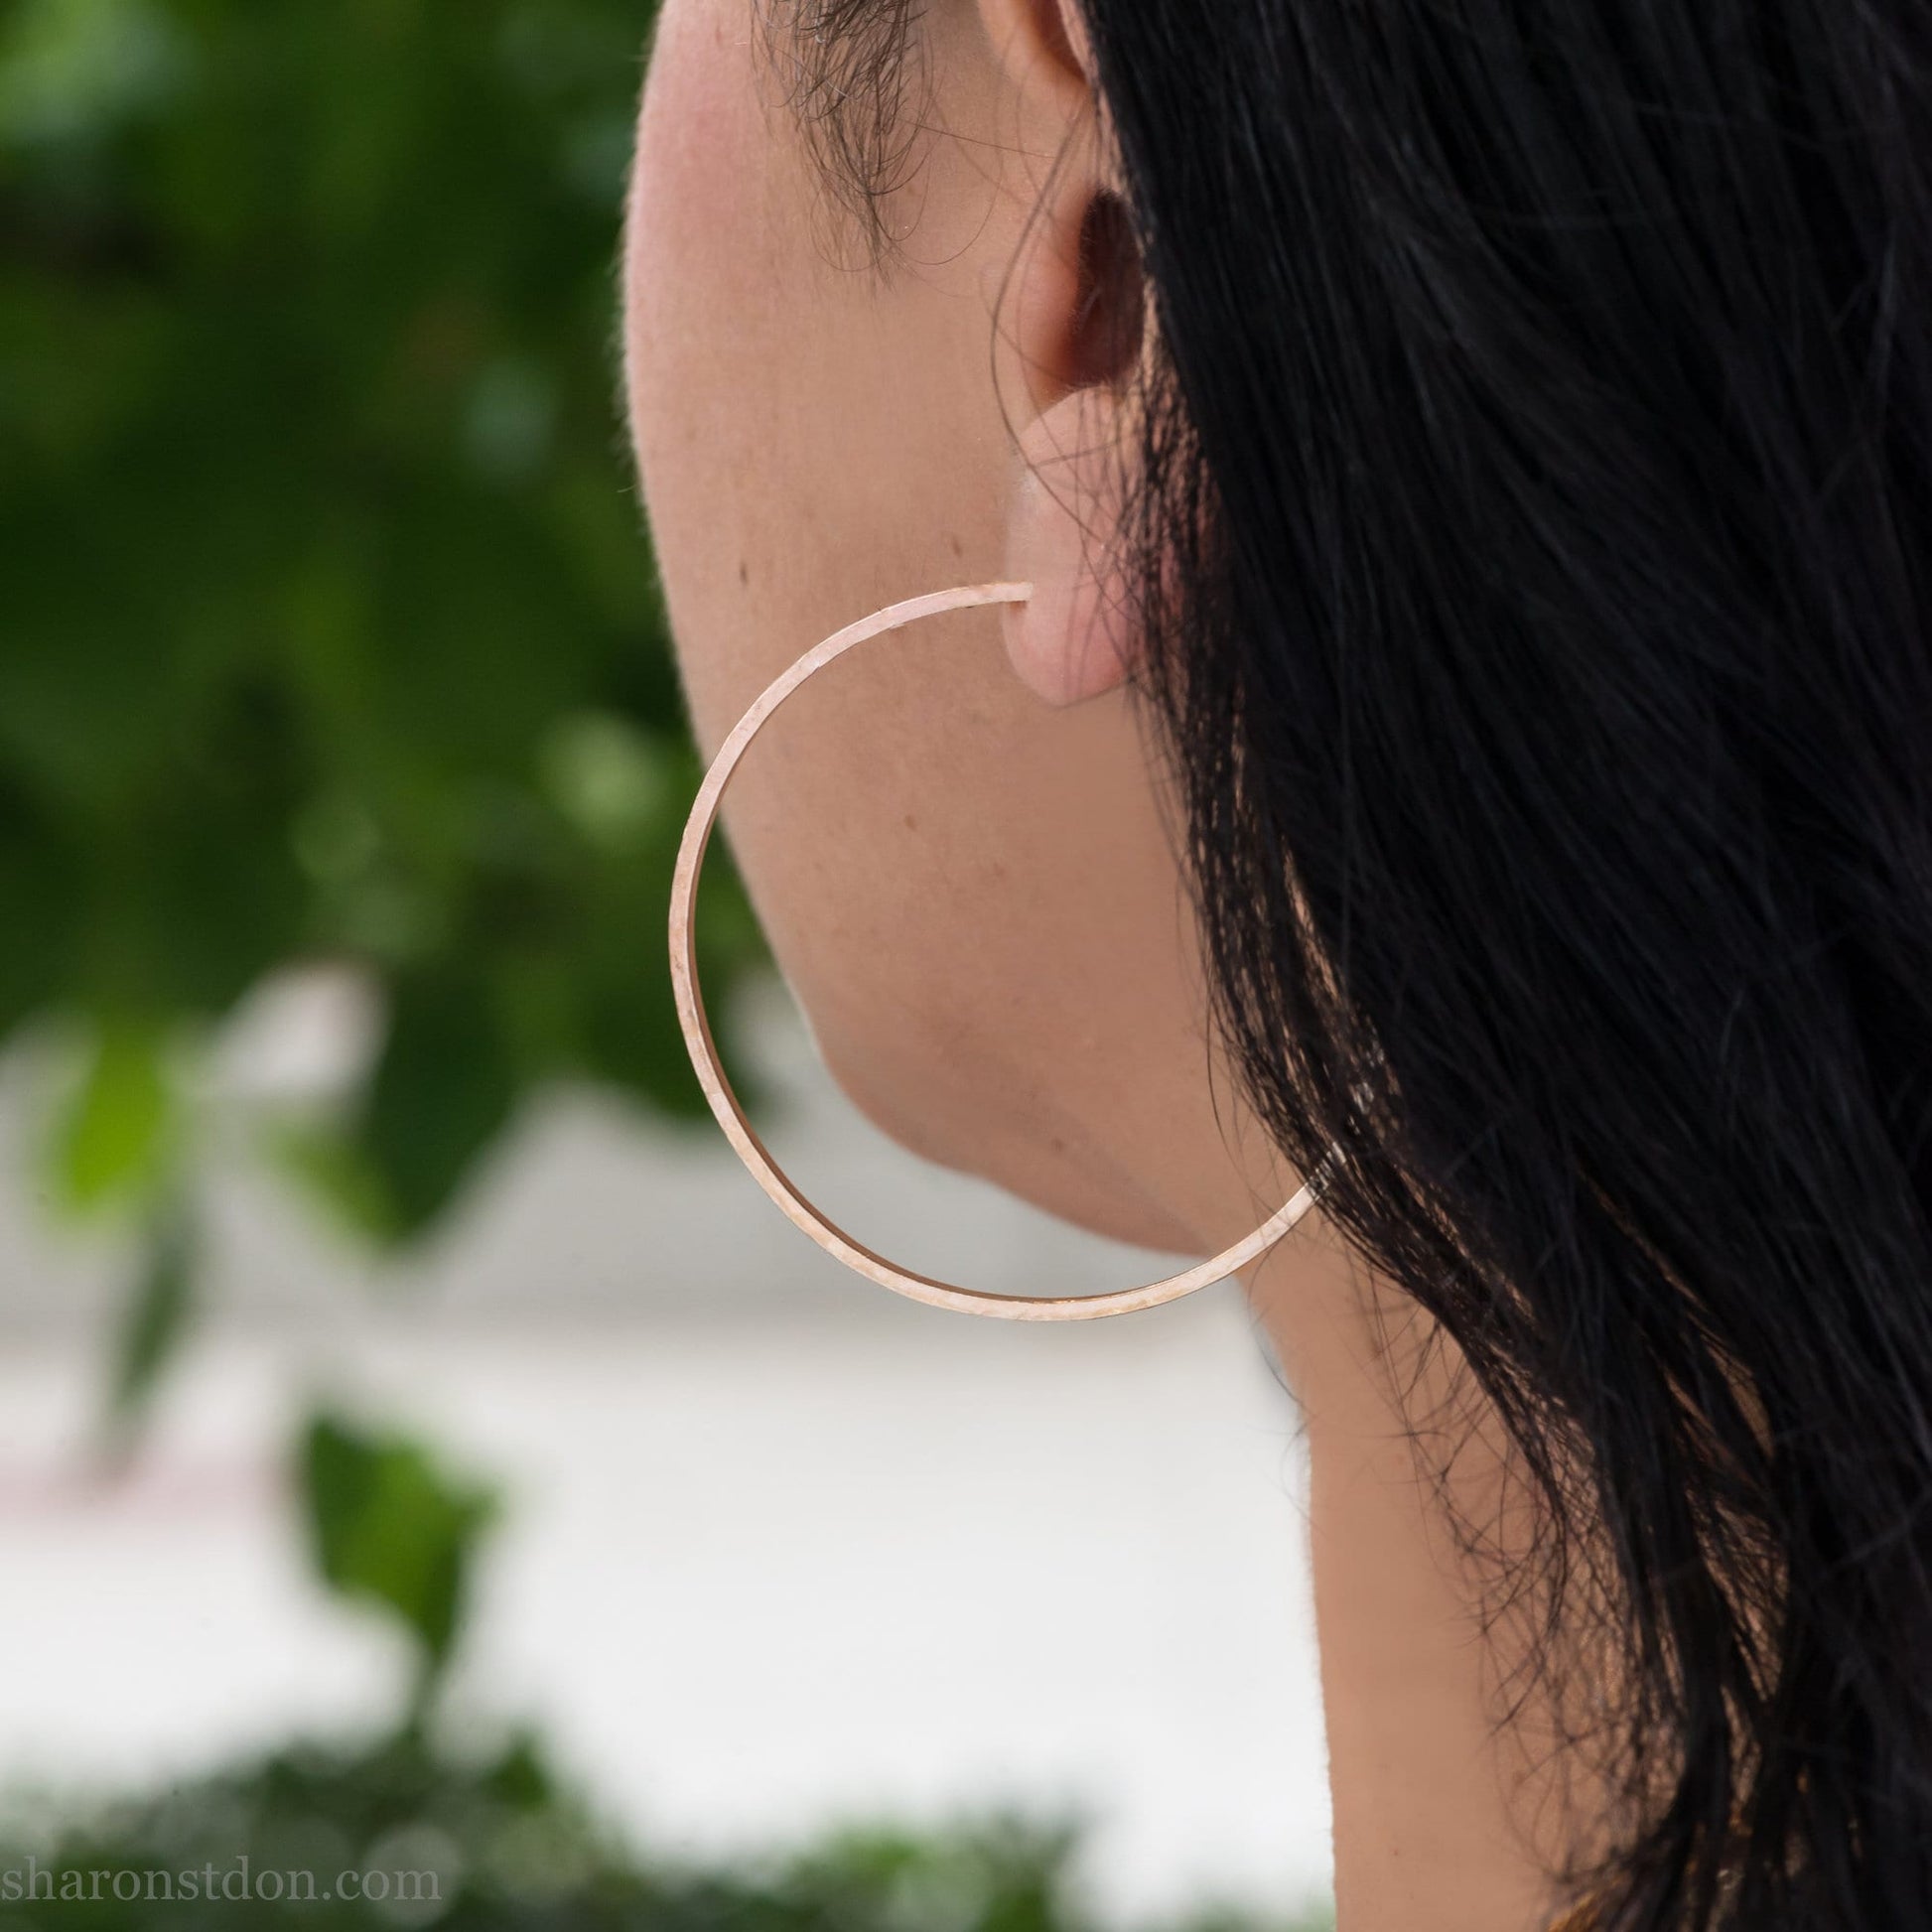 14k yellow gold hoop earrings 50mm diameter, 2mm wide, 1.5mm thick.  High quality, handmade with hammered texture.